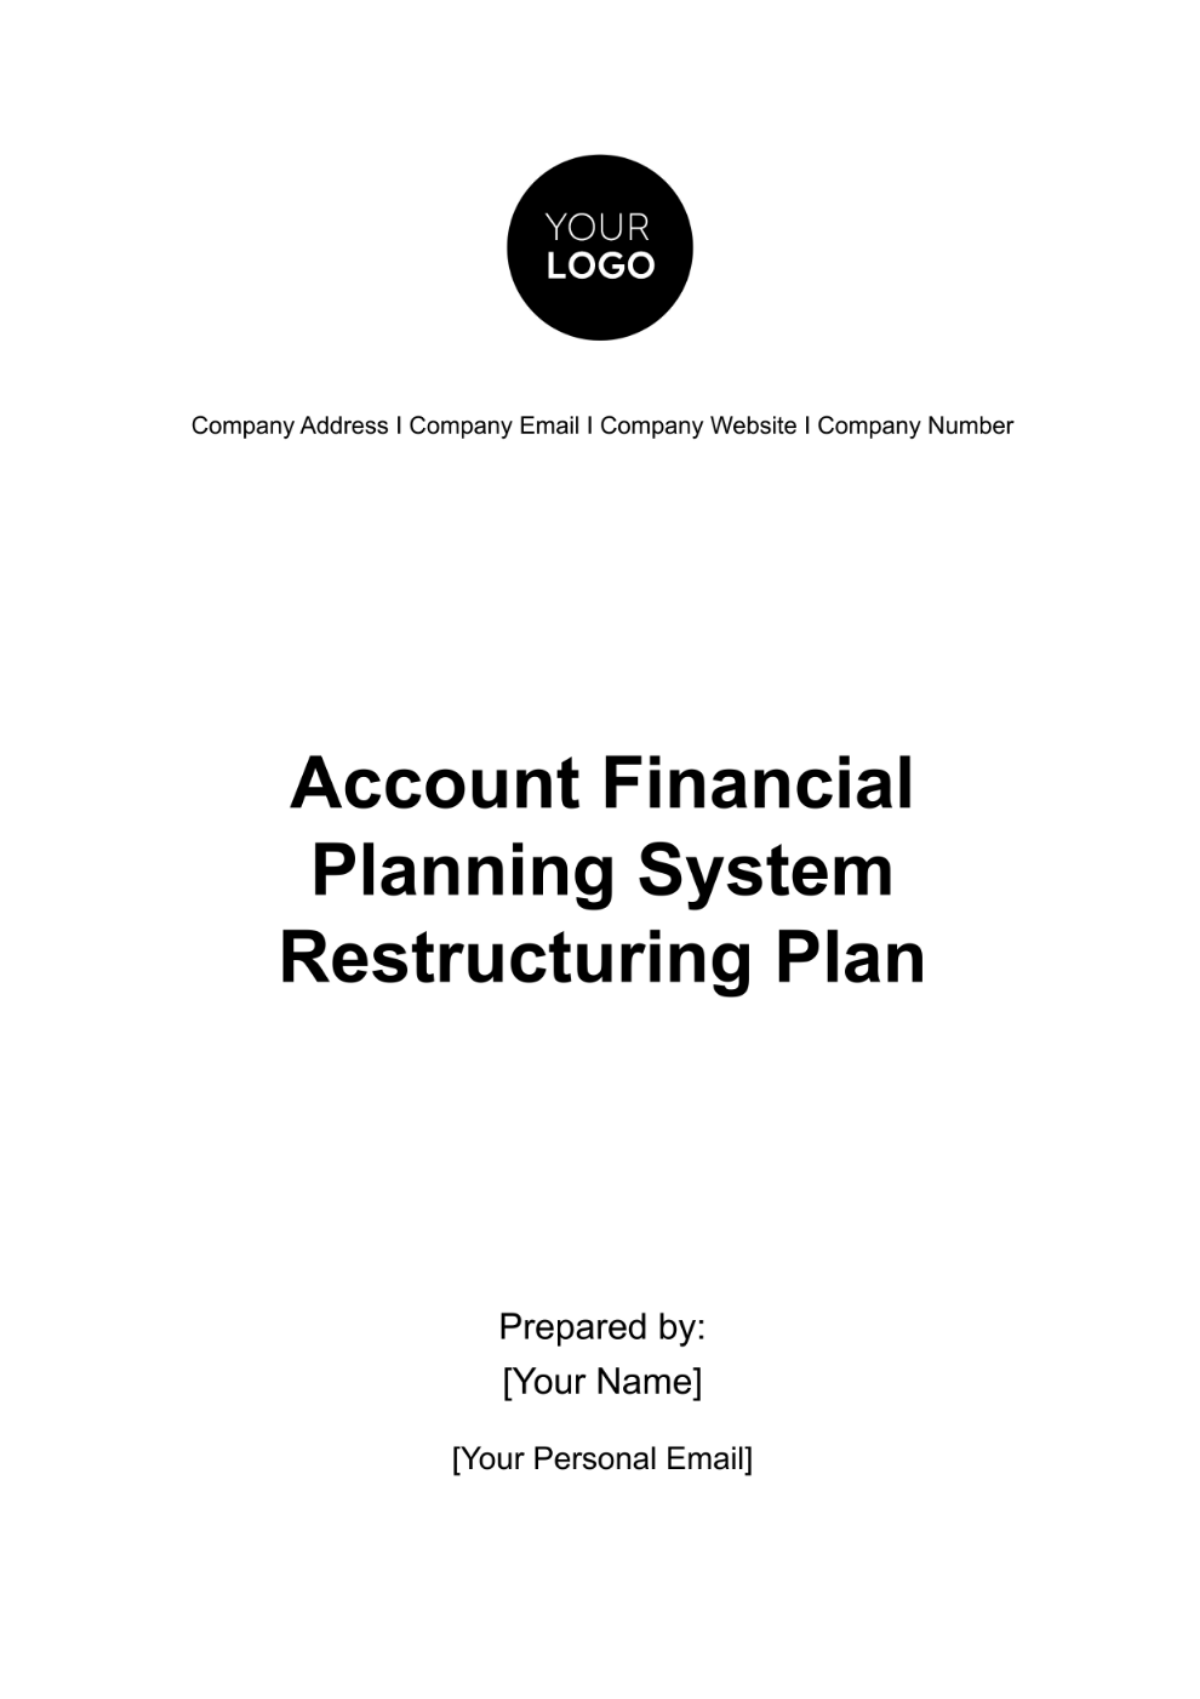 Account Financial Planning System Restructuring Plan Template